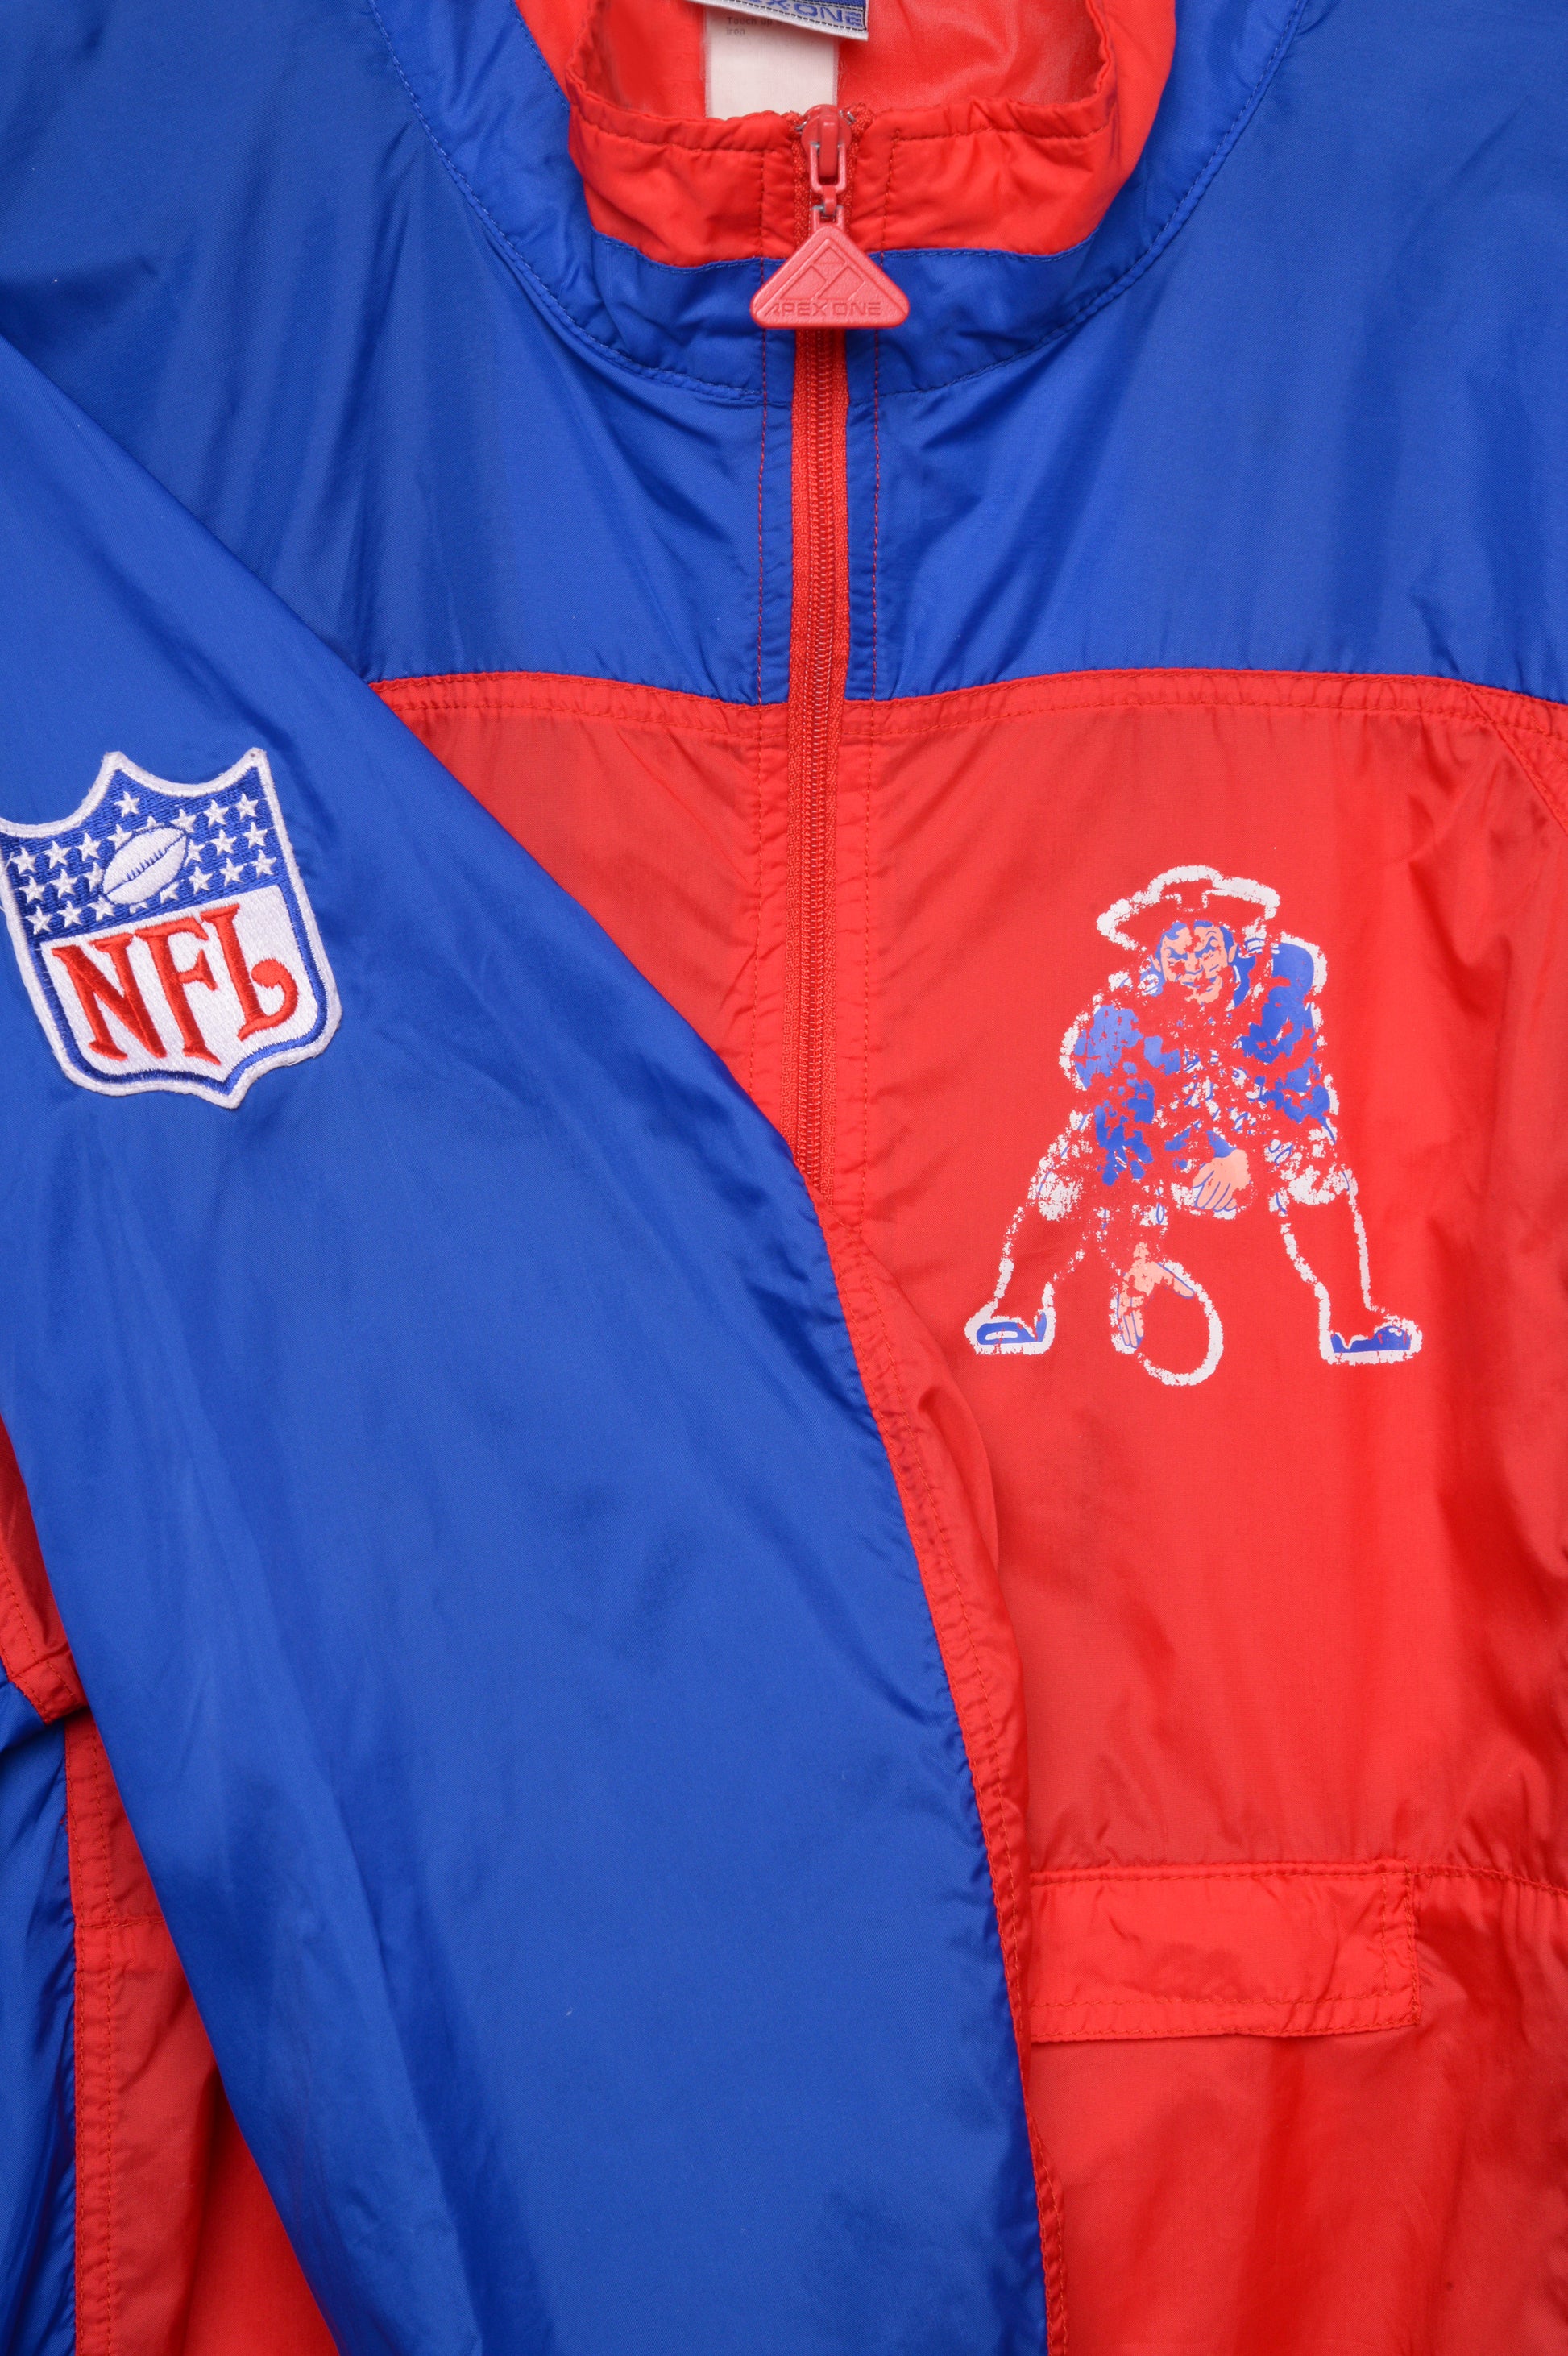 Blue and Red Satin New England Patriots Jacket - Jacket Makers